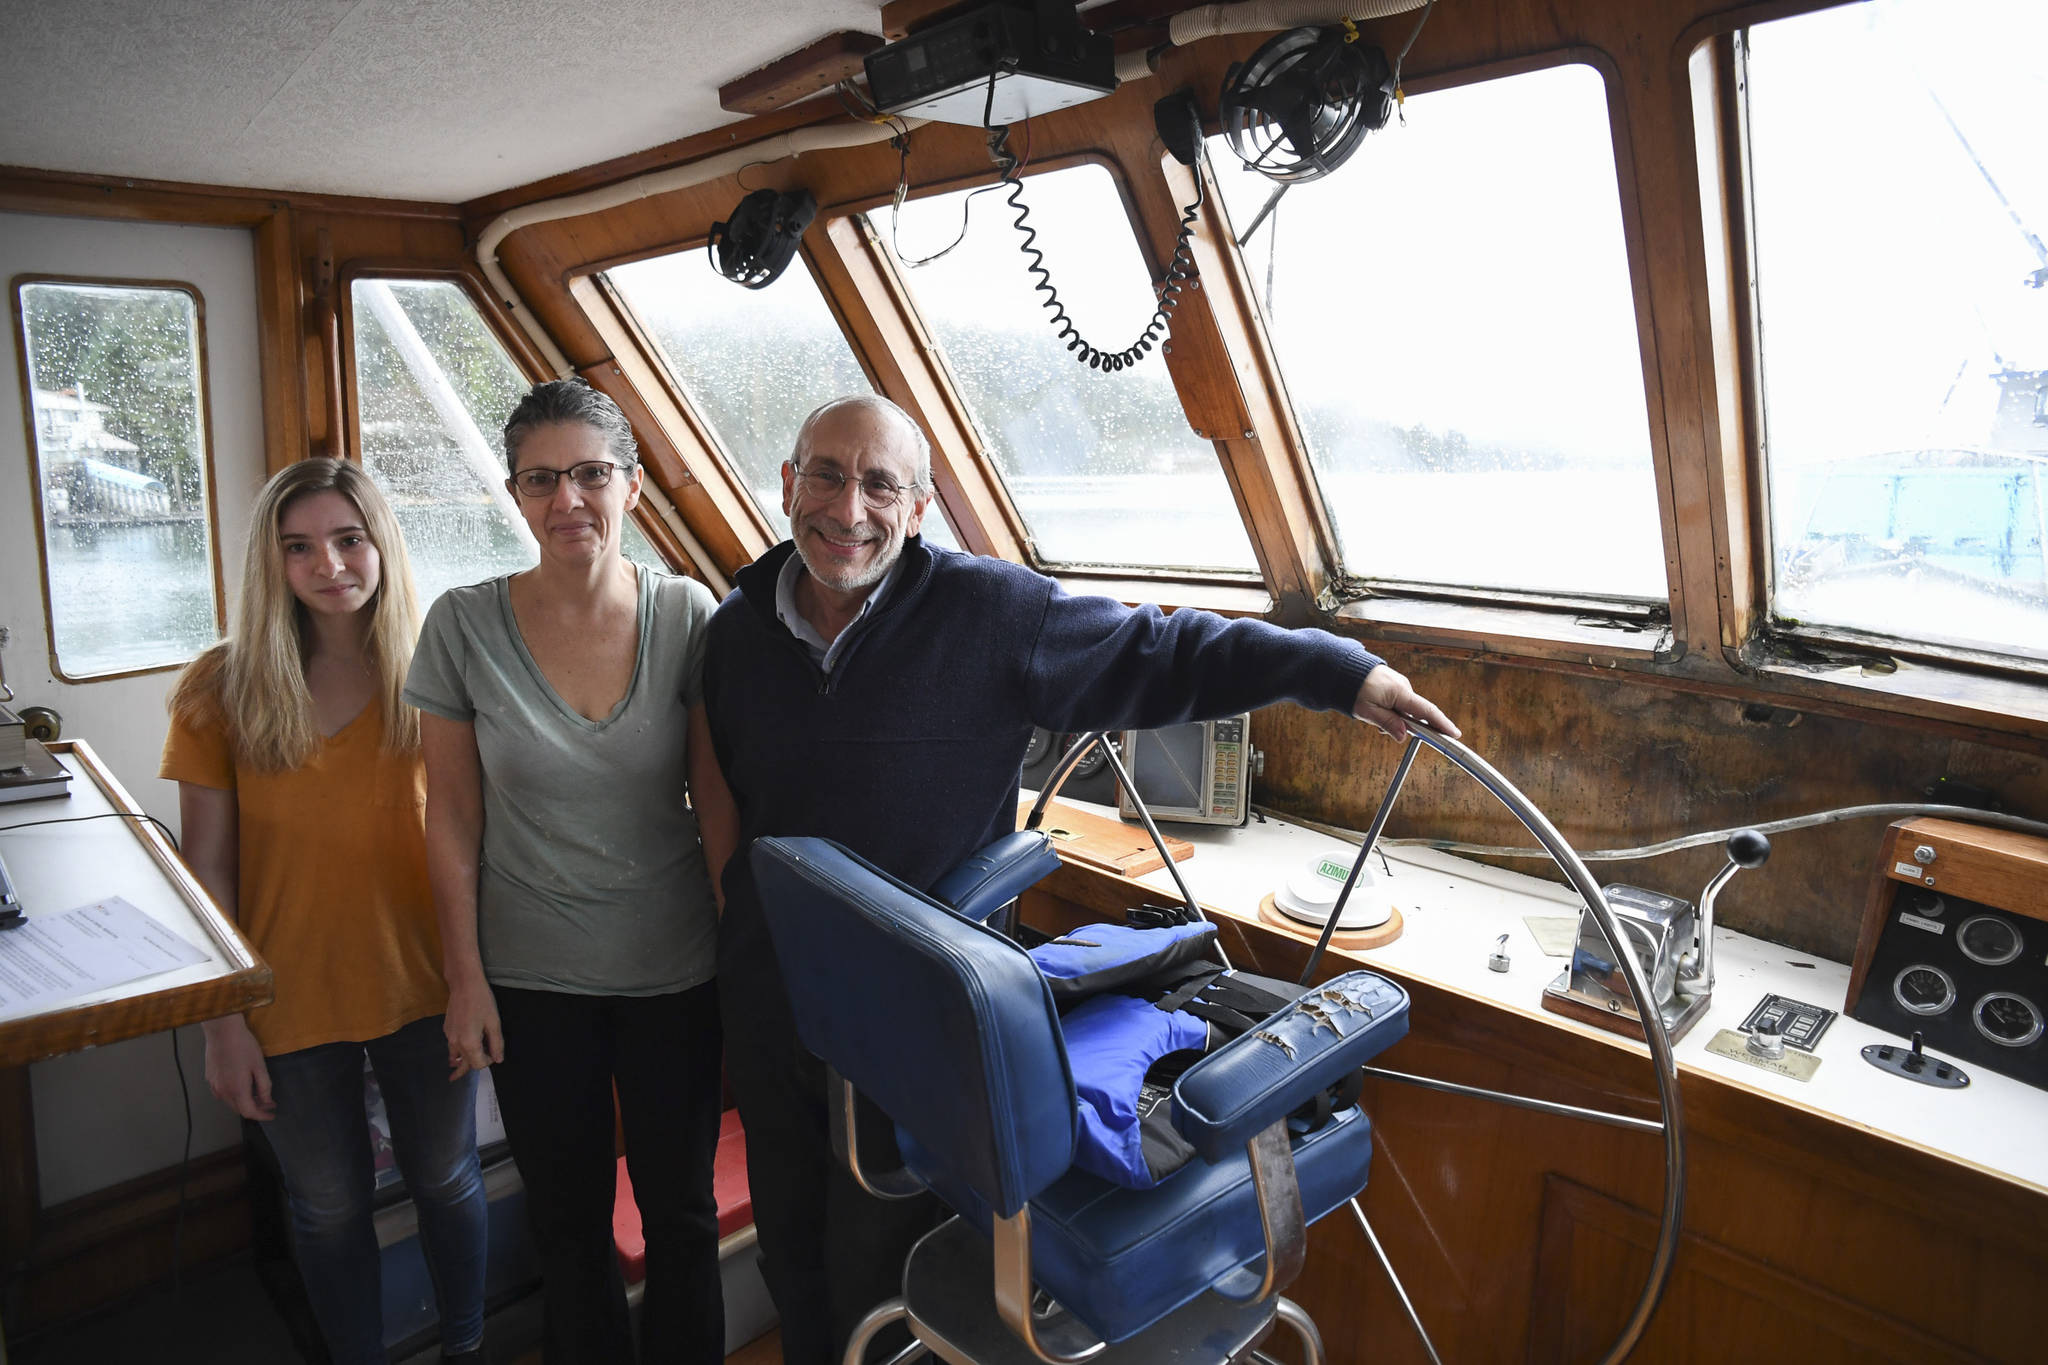 Rabbi Yehoshua Mizrachi, his partner Sheila McNamee and her daughter, Helena, 19, aboard their newly bought custom built 52-foot trawler, the M/V Sephina, in the Don D. Statter Memorial Boat Harbor in Auke Bay on Wednesday, Nov. 13, 2019. Rabbi Mizrachi said he found the boat of his dreams and traveled across the country to pick it up in Hoonah this summer. (Michael Penn | Juneau Empire)